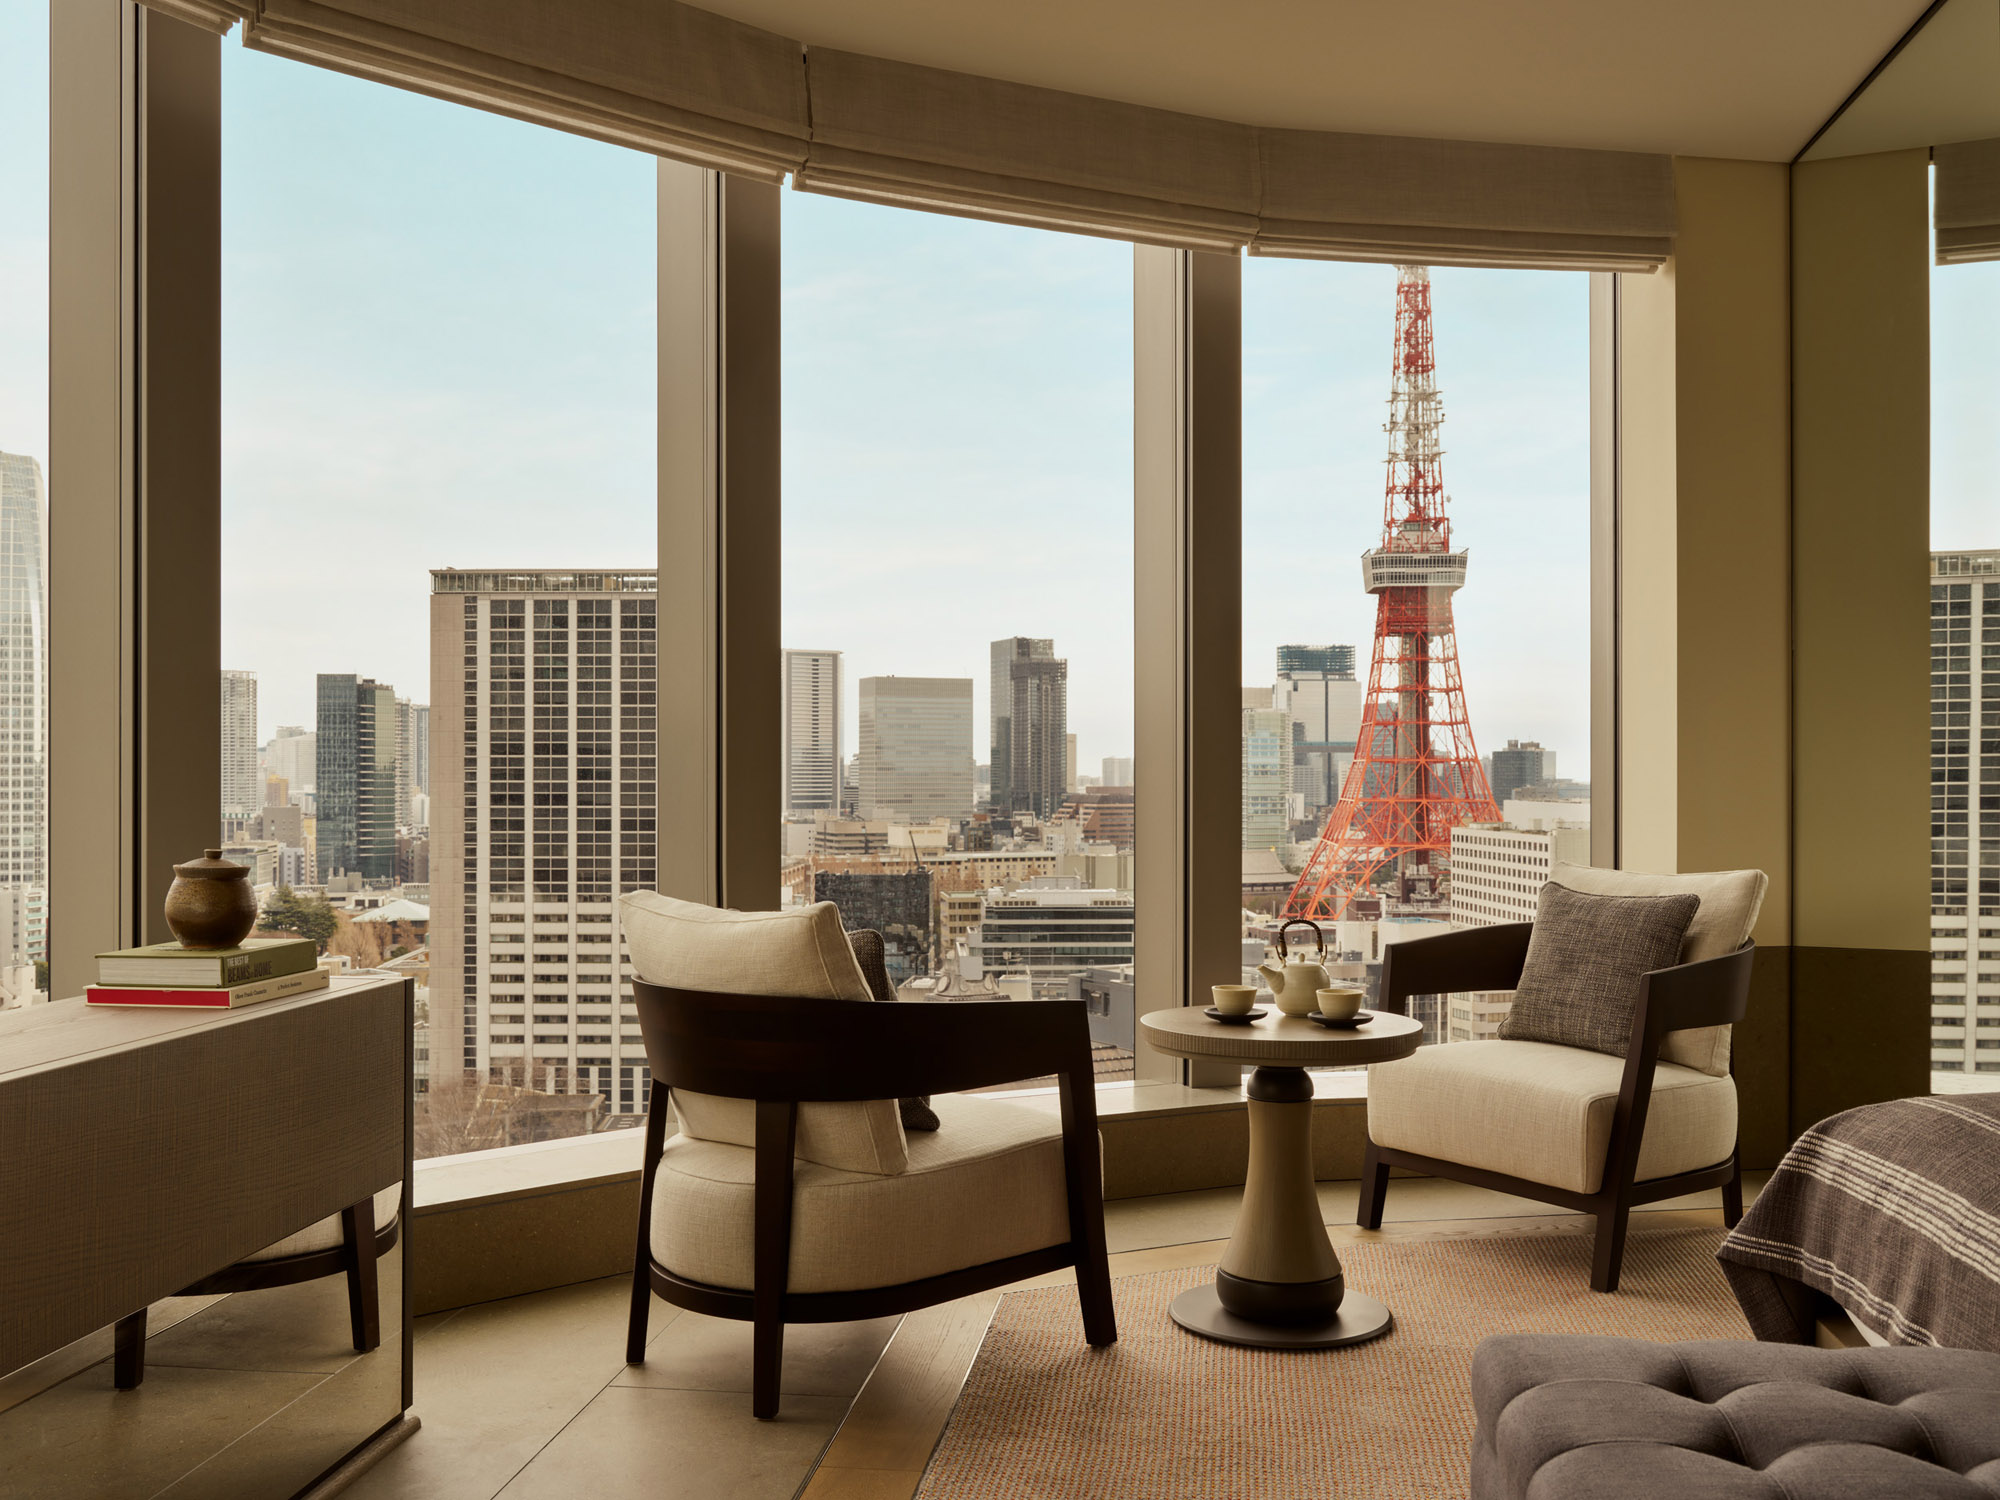 View of Tokyo Tower from bedroom